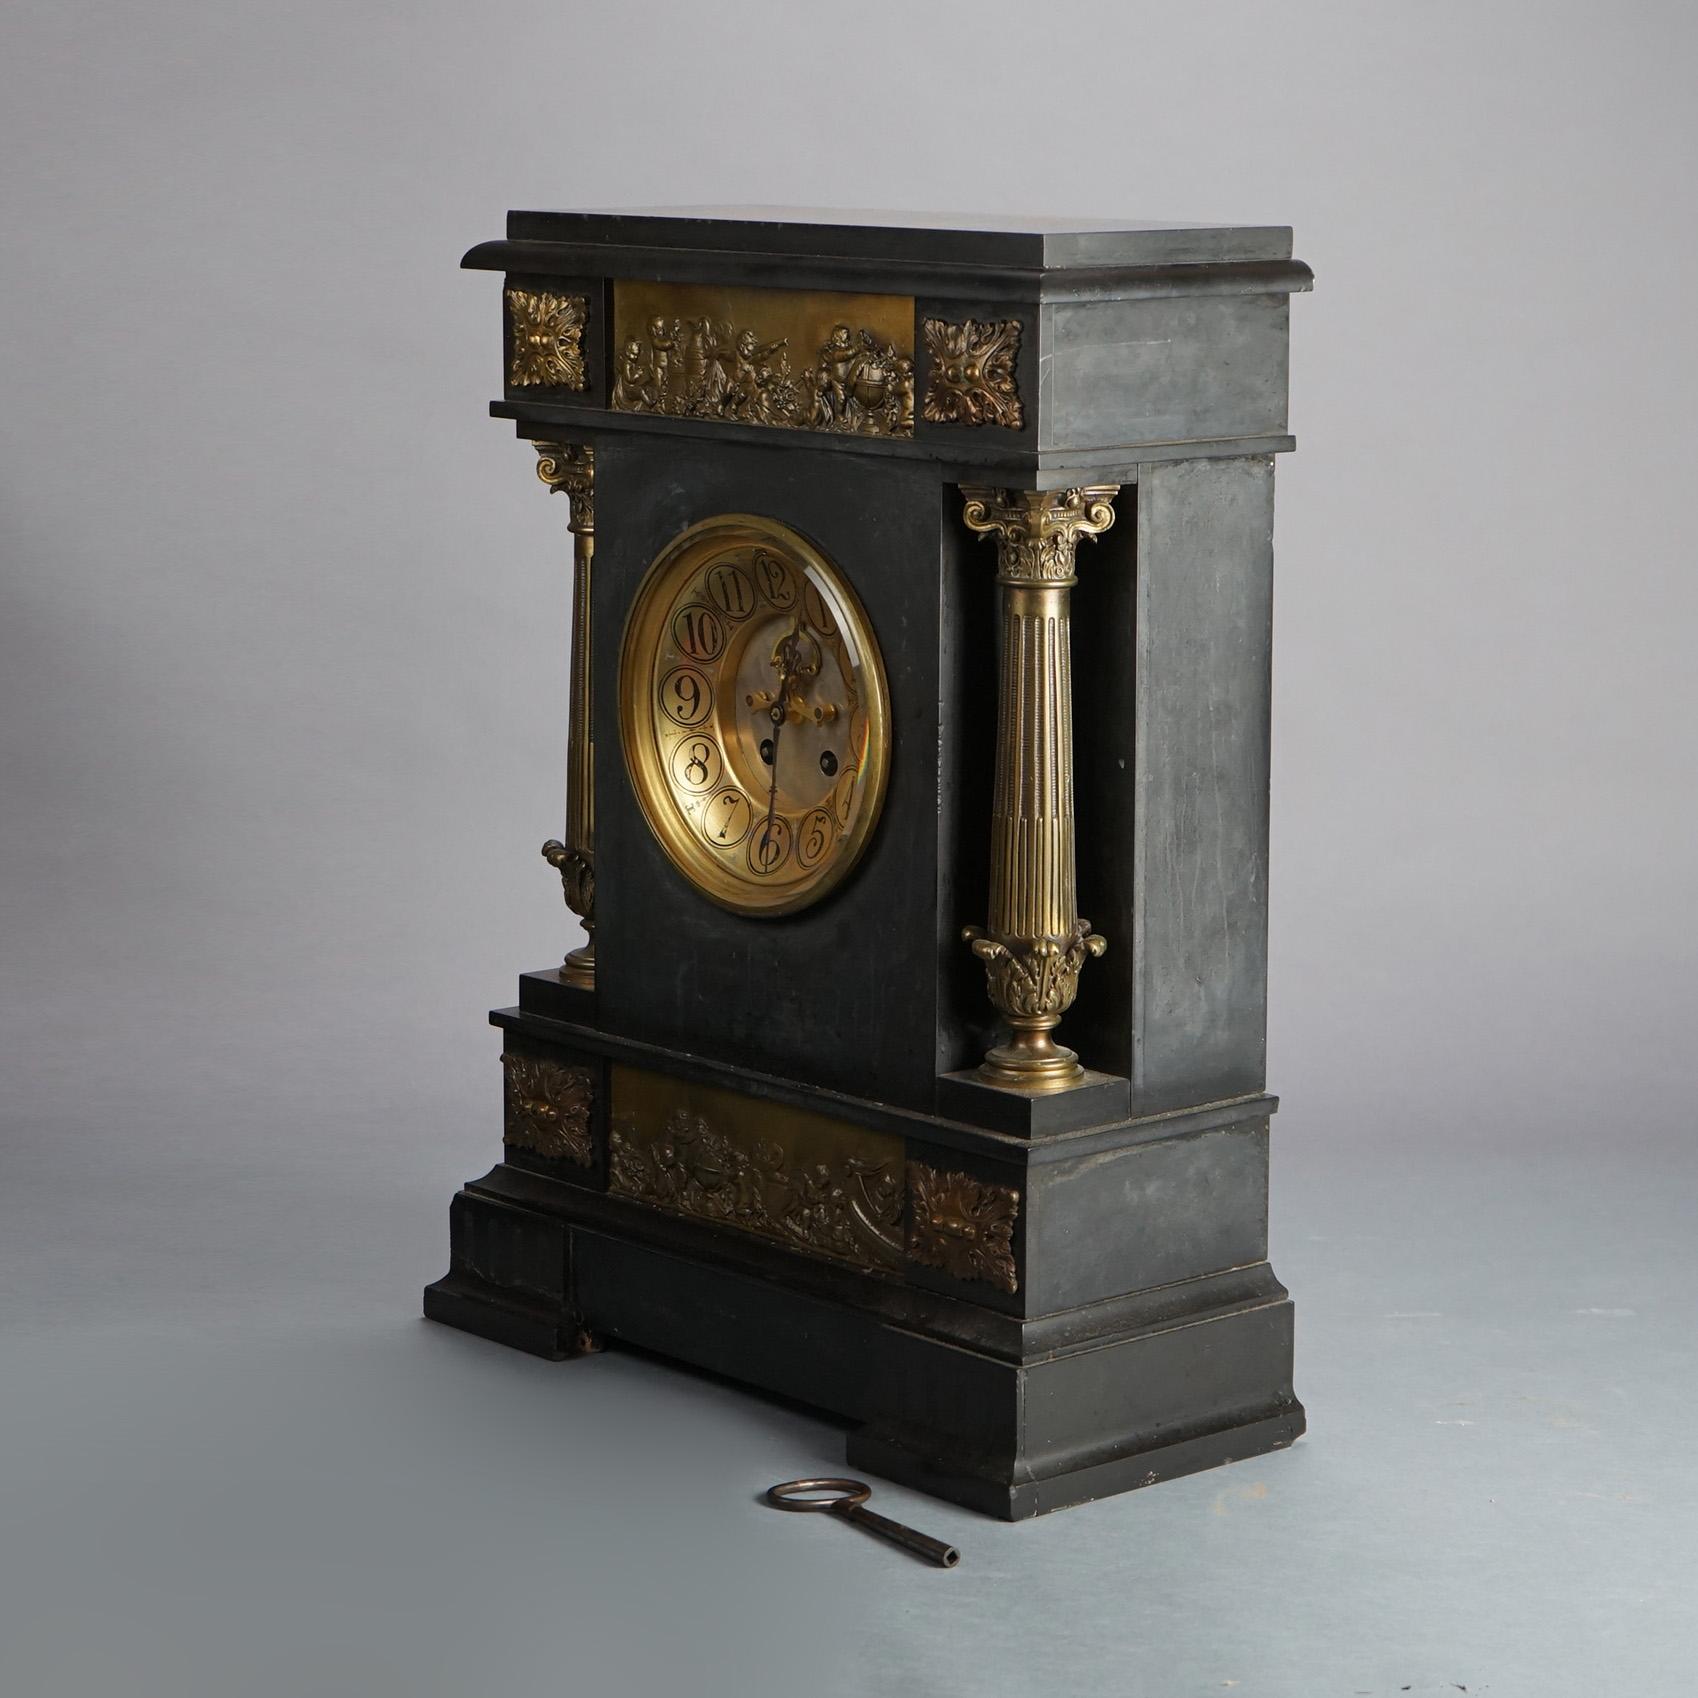 Antique Neoclassical Second Empire Black Marble Mantle Clock with Bronze Columns & Cupid Scene in Relief Frieze & Base Plaques C1880

Measures- 34''H x 74.5''W x 20''D

